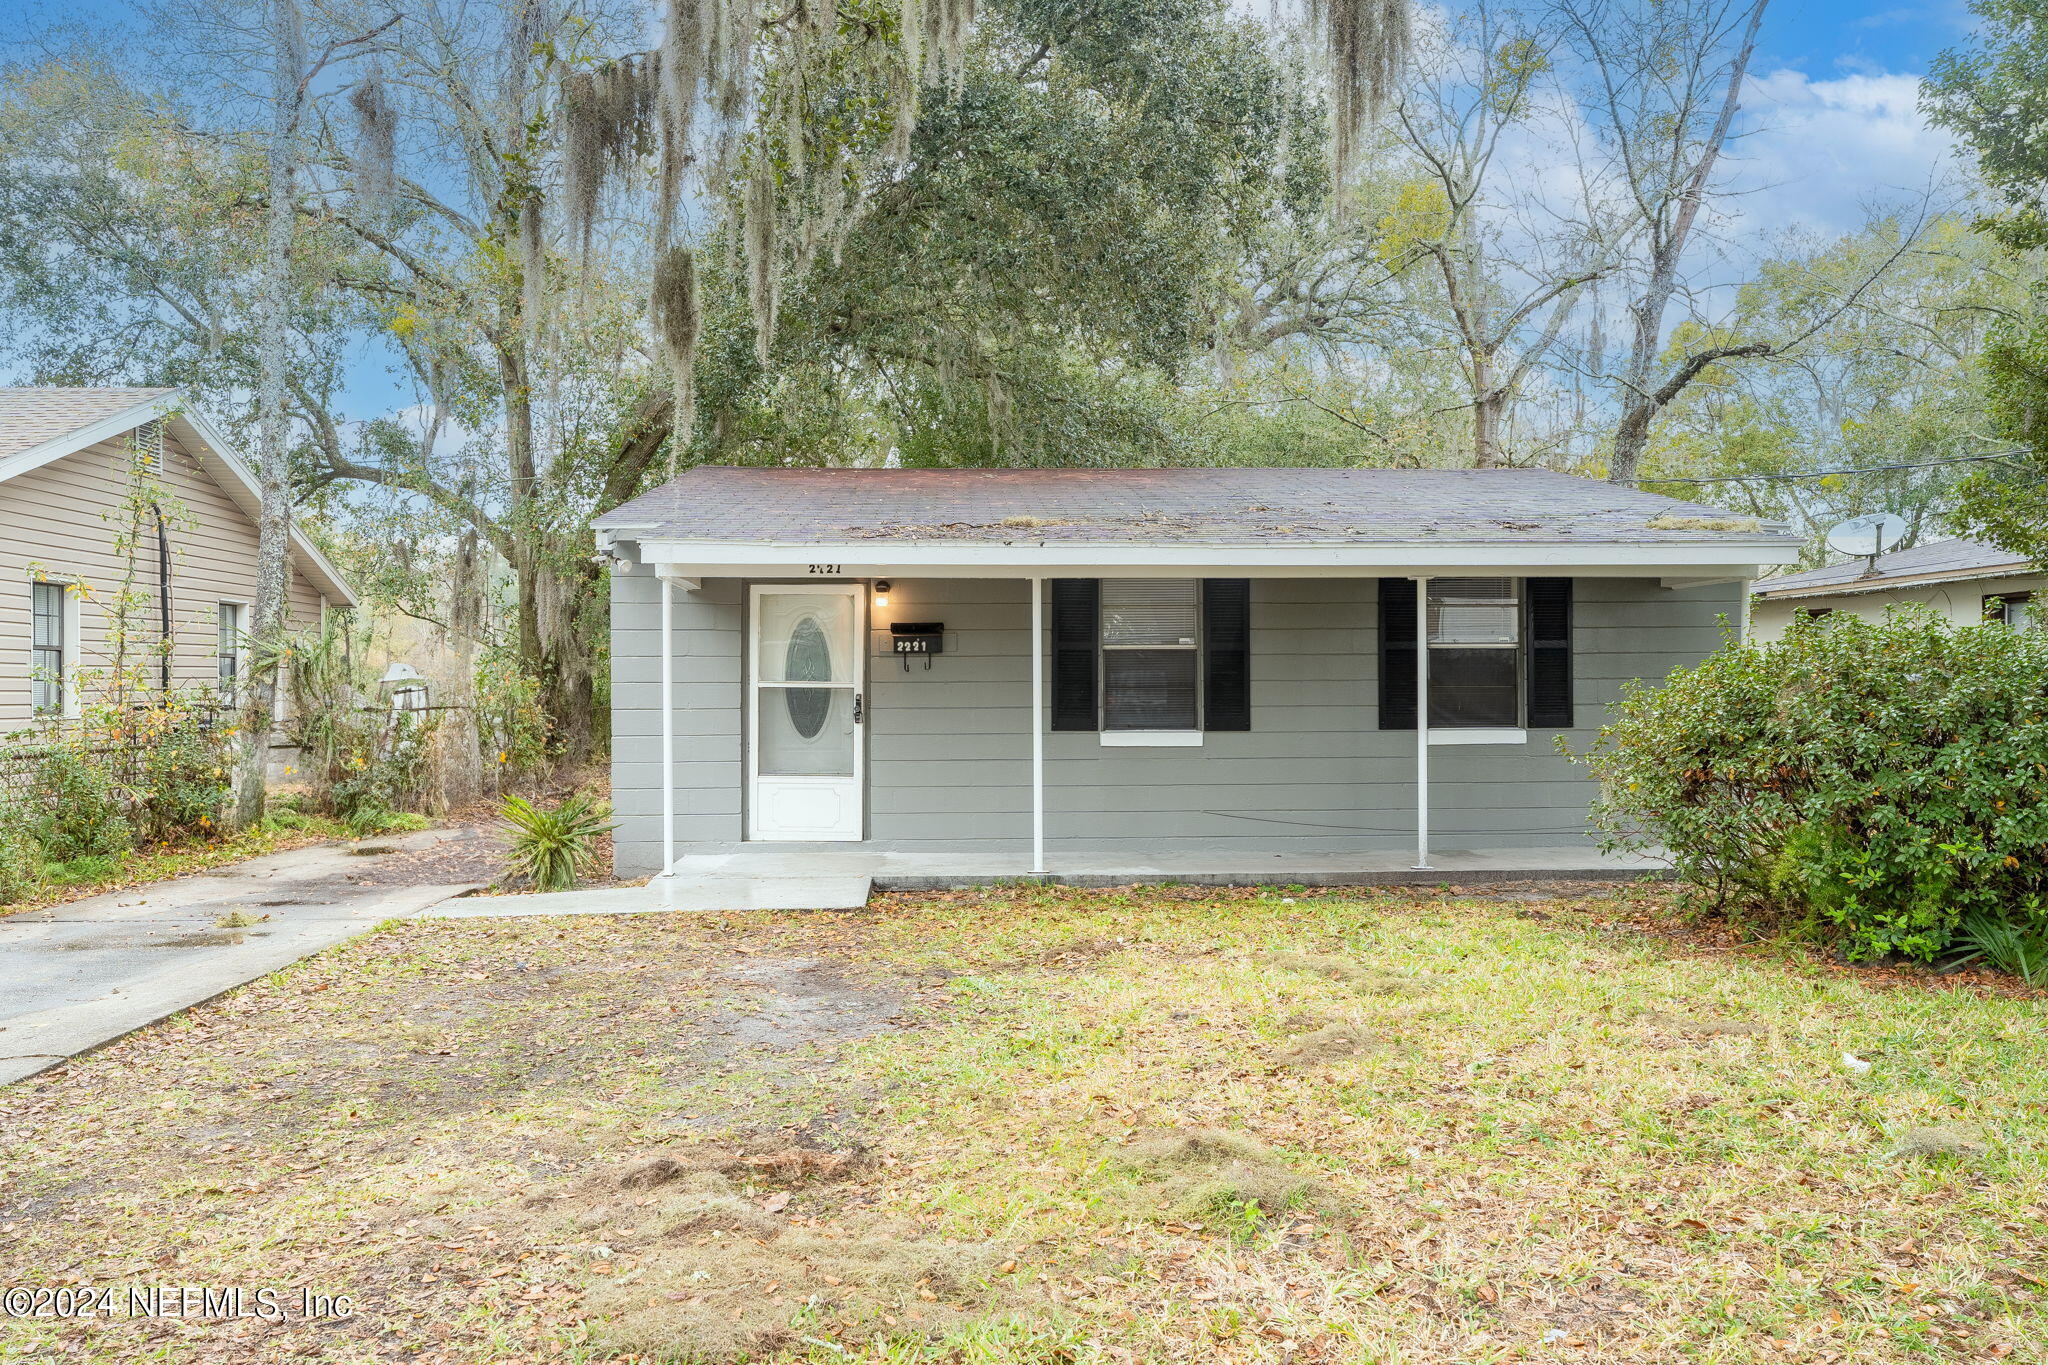 Jacksonville, FL home for sale located at 2221 Commonwealth Avenue, Jacksonville, FL 32209